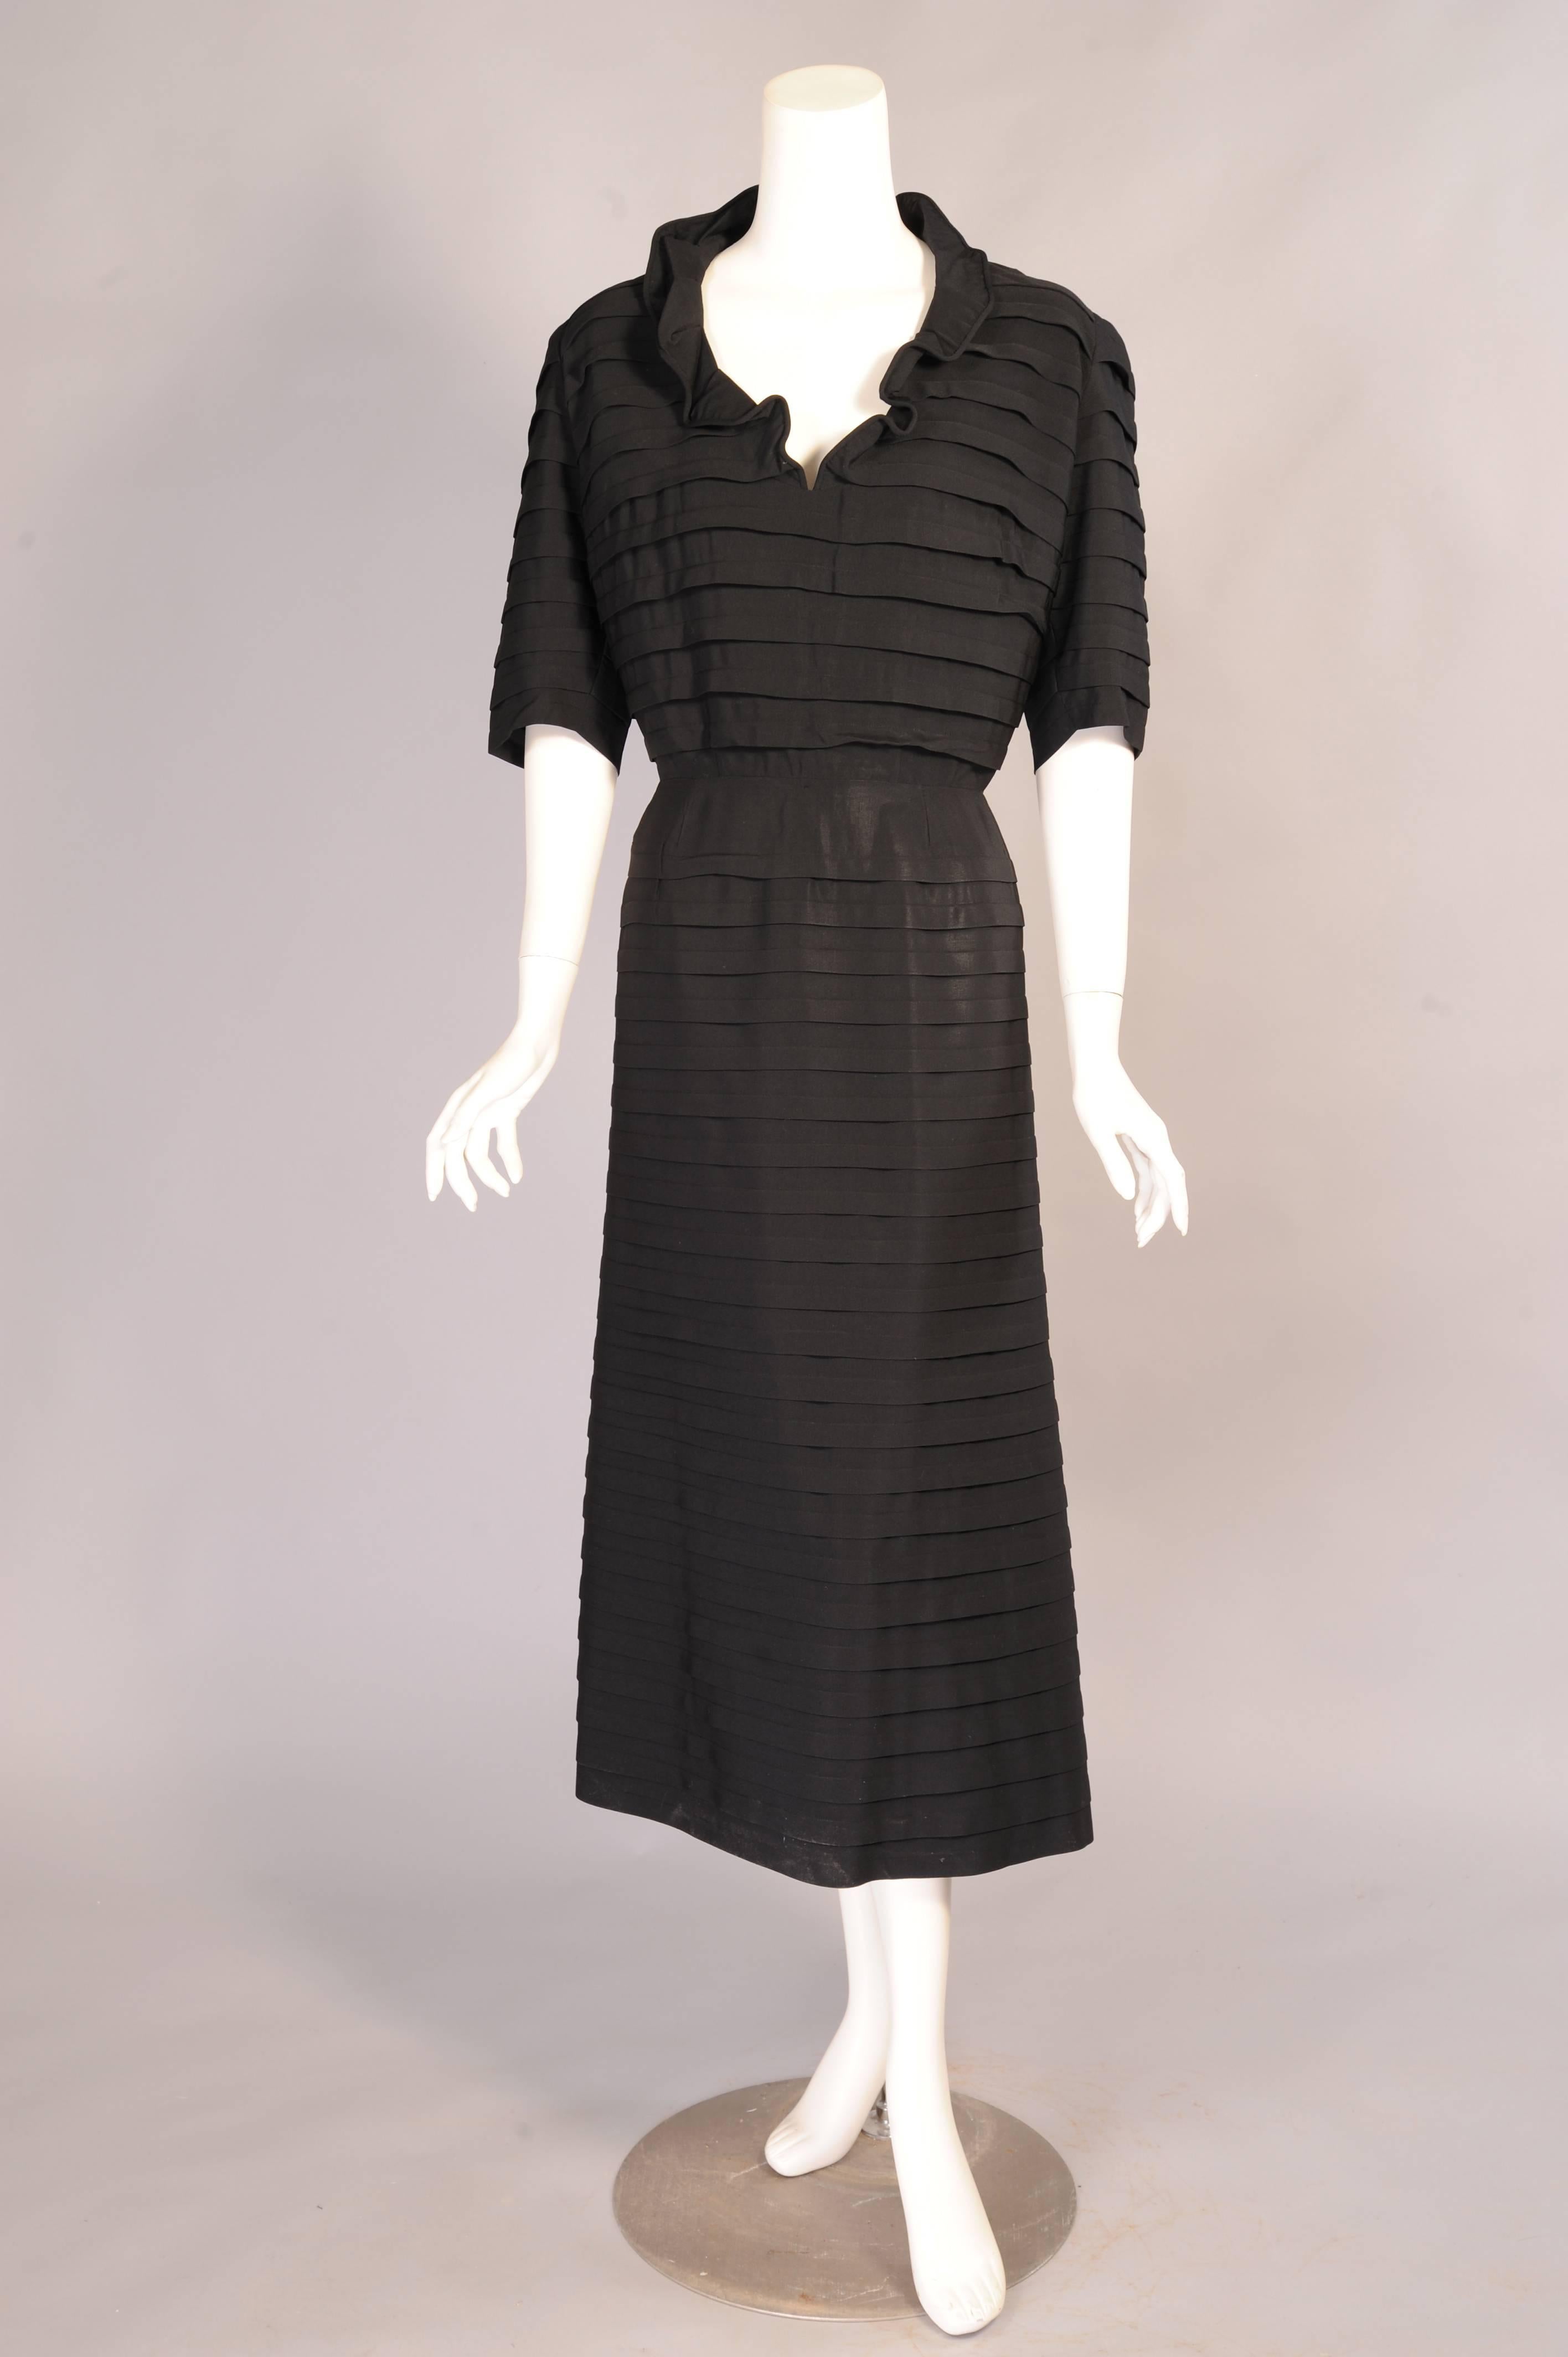 This is a French couture dress from the estate of an American lady who fell in love with and married an Italian Count in the 1950's. The black silk crepe dress is pleated from the shoulders to the hem, but the best part is the way in which the